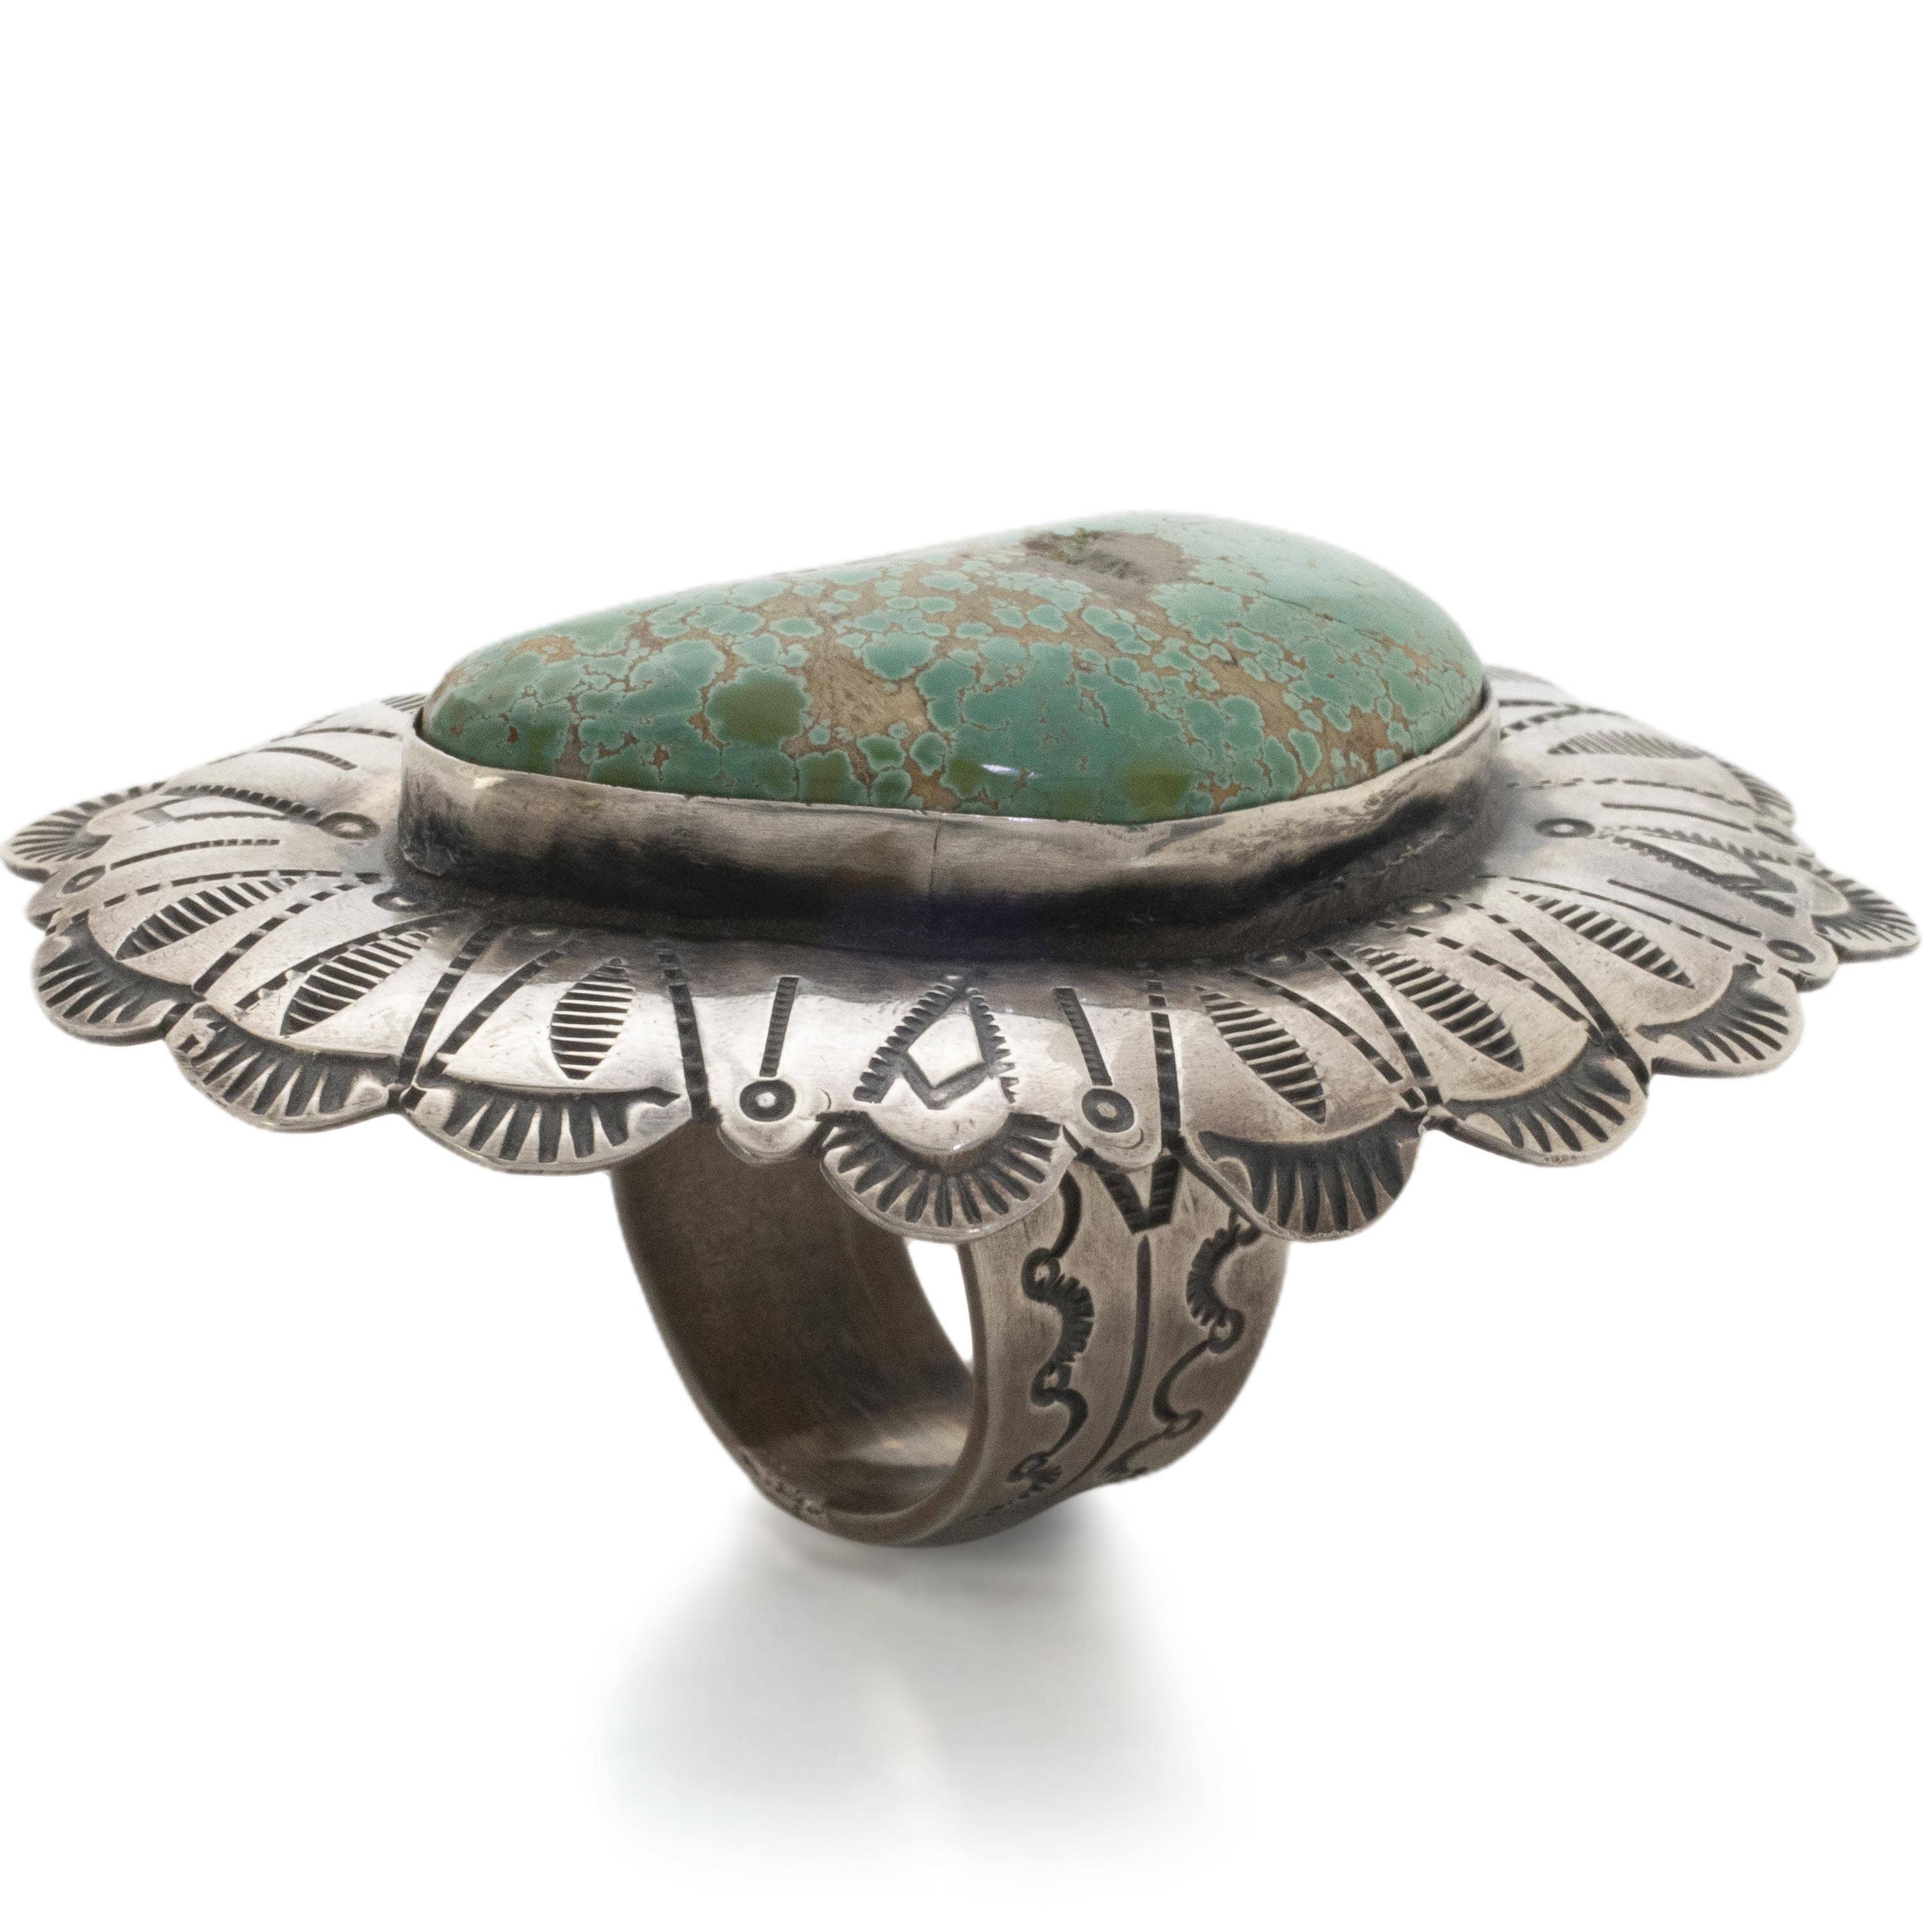 Kalifano Native American Jewelry 11 Marvin McReeves Navajo Carico Lake Turquoise USA Native American Made 925 Sterling Silver Ring NAR2400.014.11